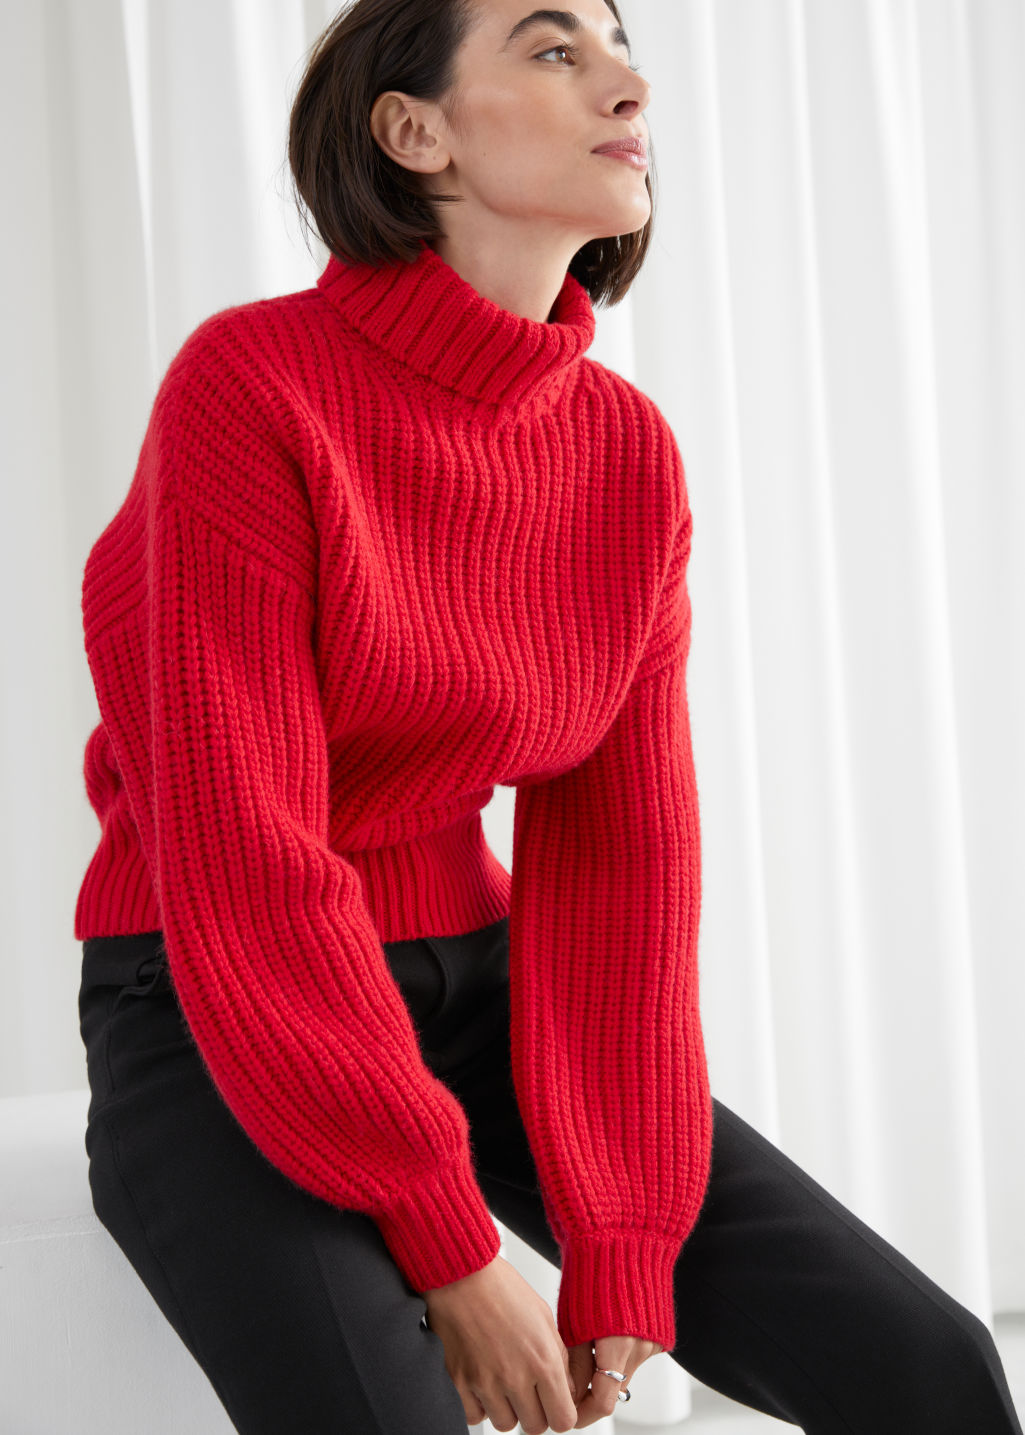 Balloon Sleeve Knit Sweater - Red - Sweaters - & Other Stories